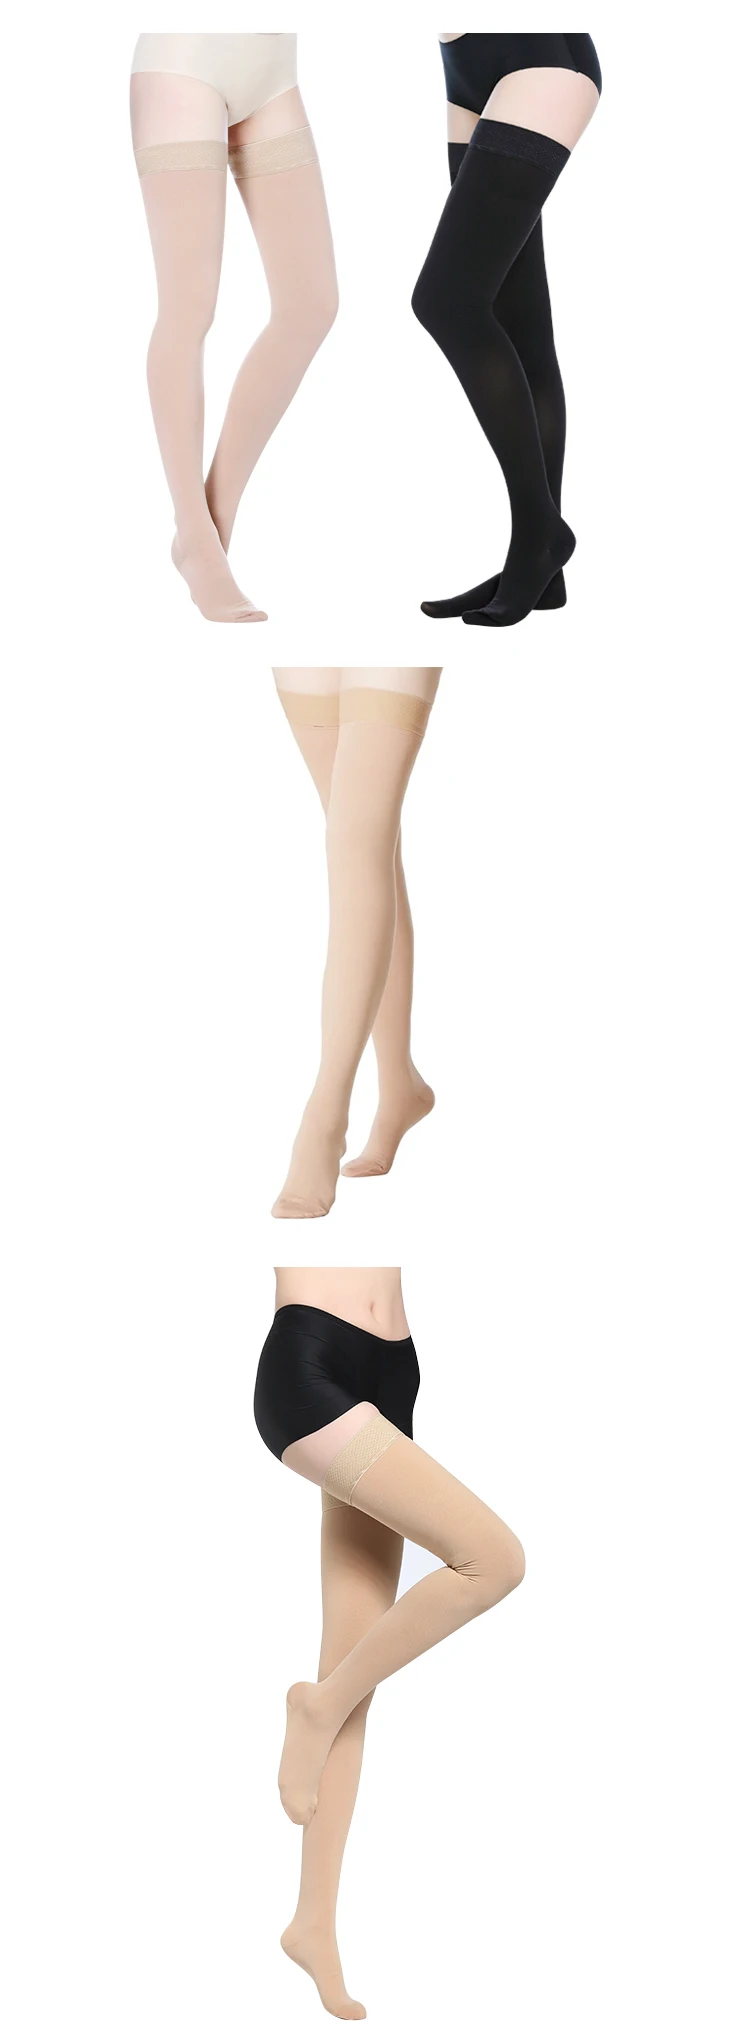 Big Stretch Medical Compression Stockings with Zipper